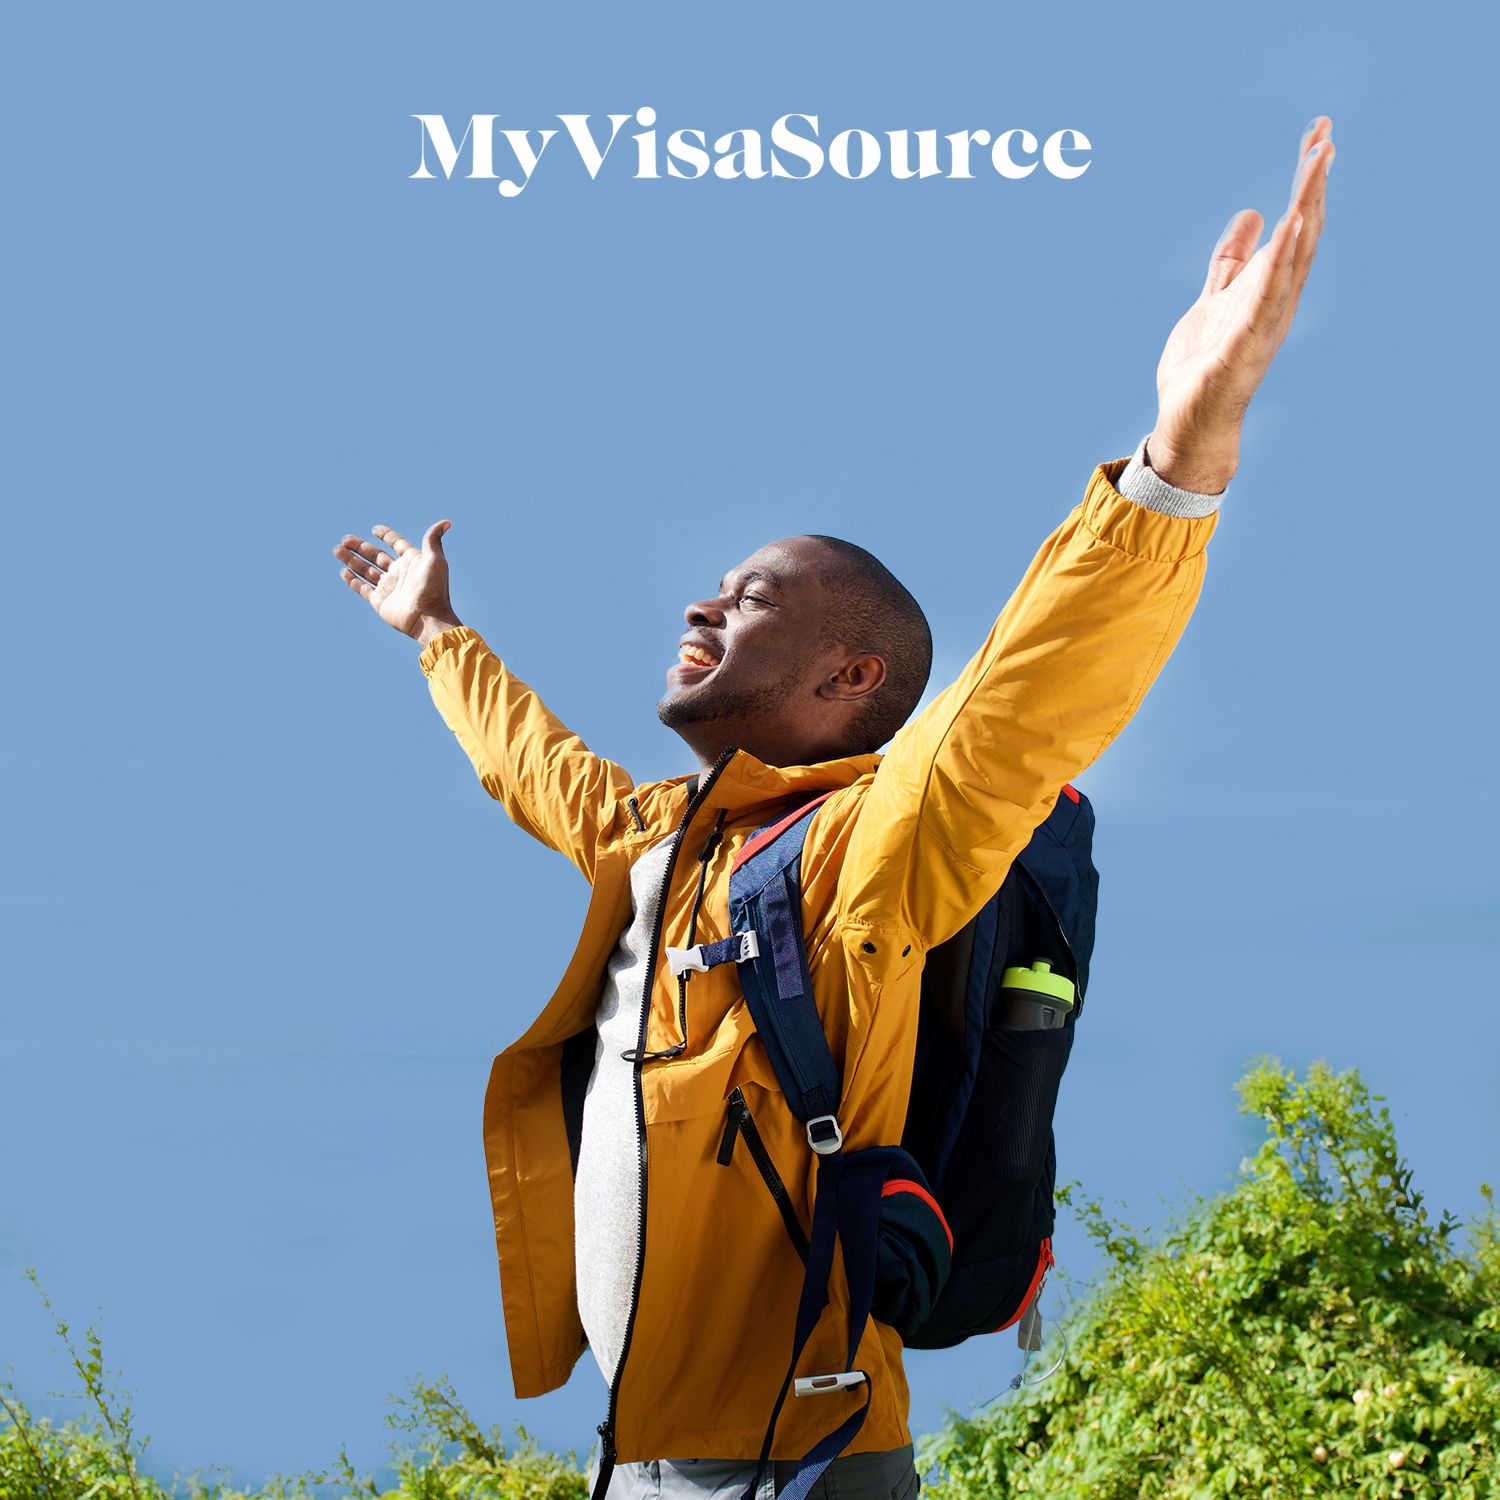 smiling young man with hands in the air my visa source